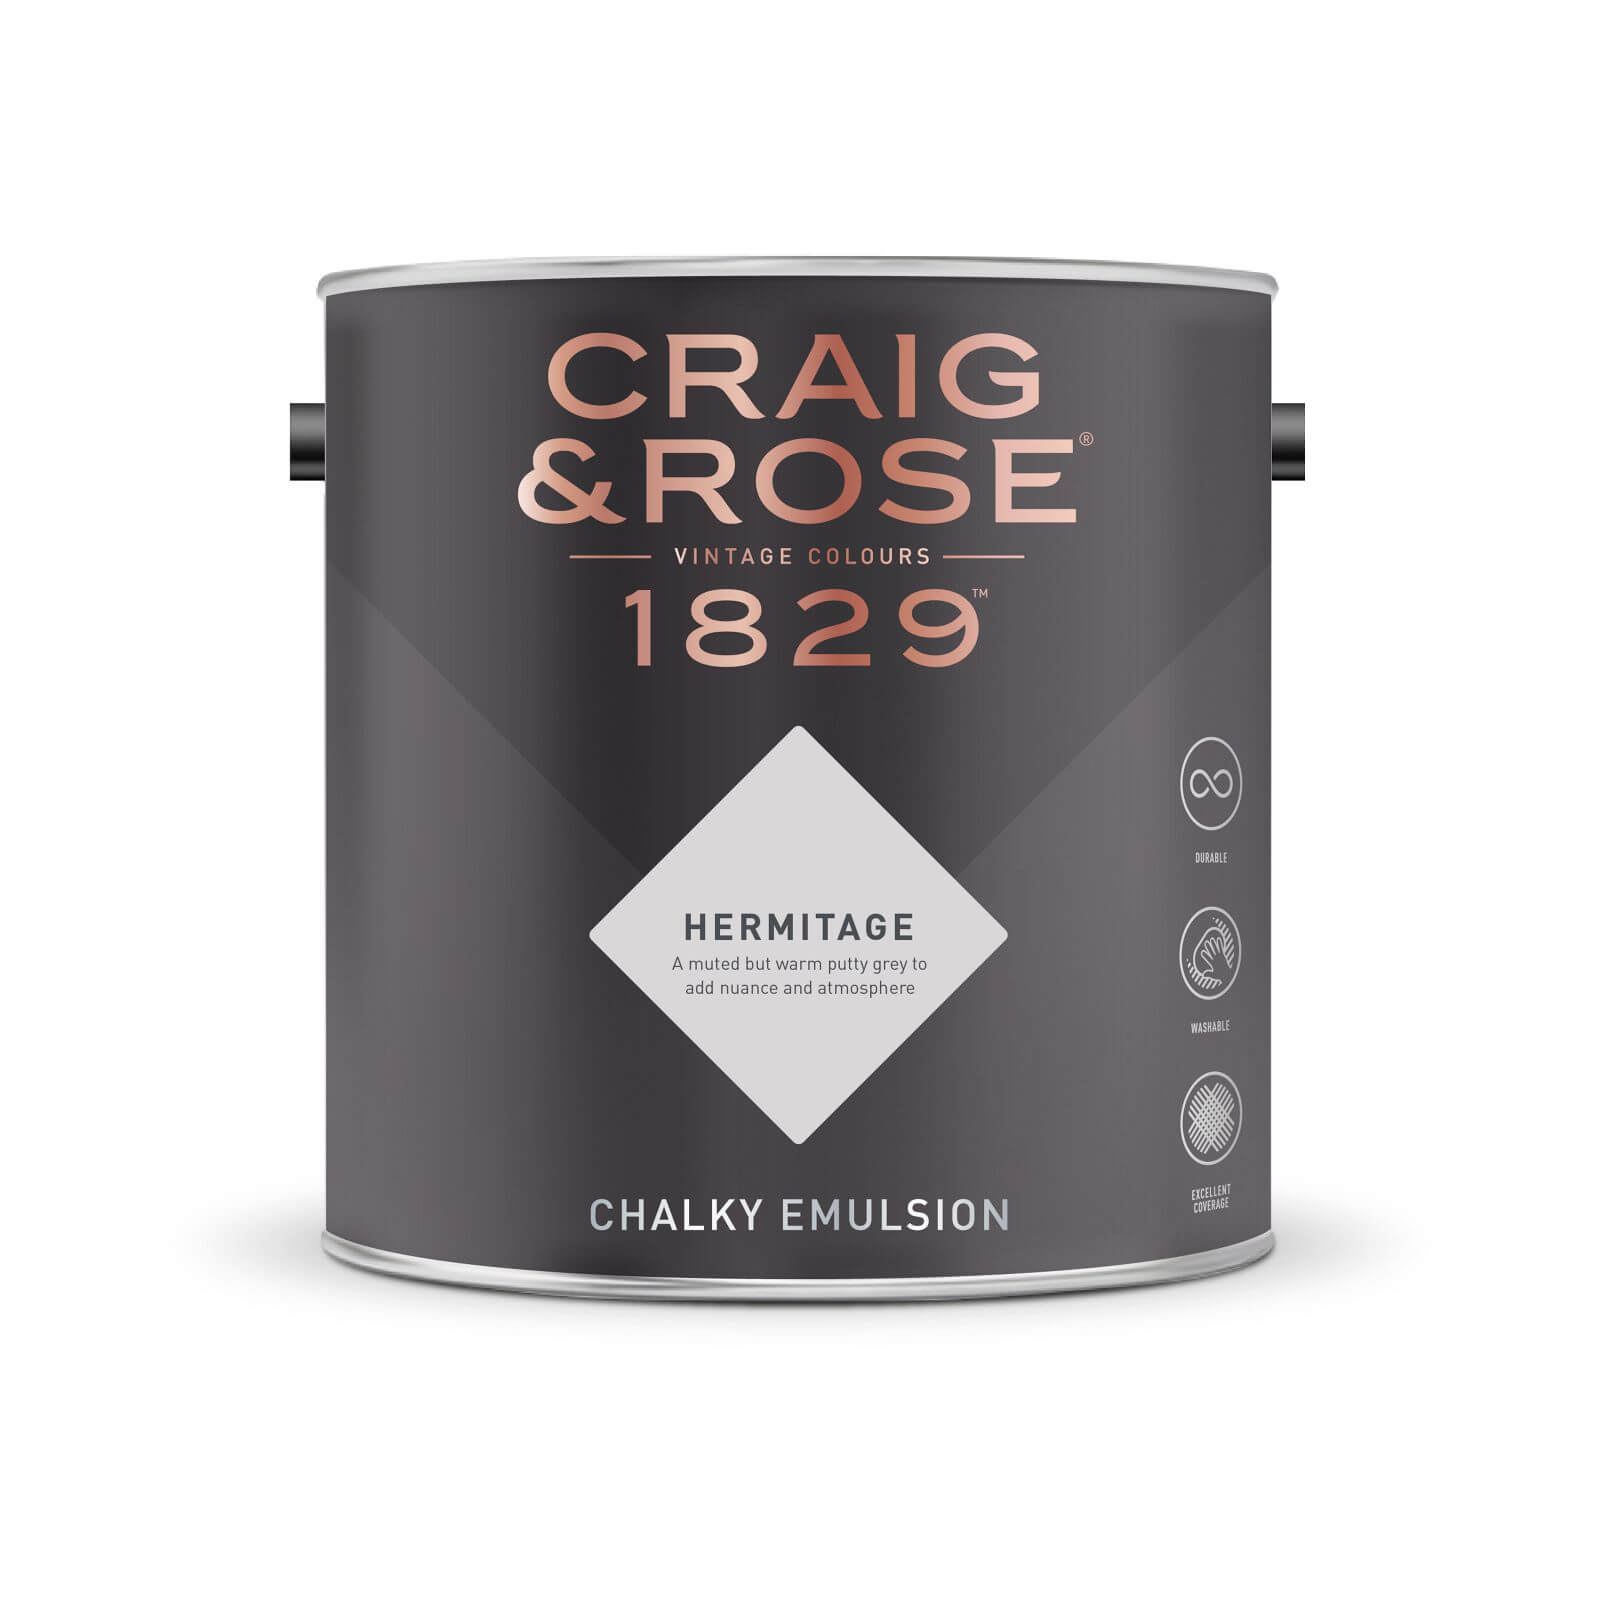 Craig & Rose 1829 Chalky Emulsion Paint Hermitage - 5L